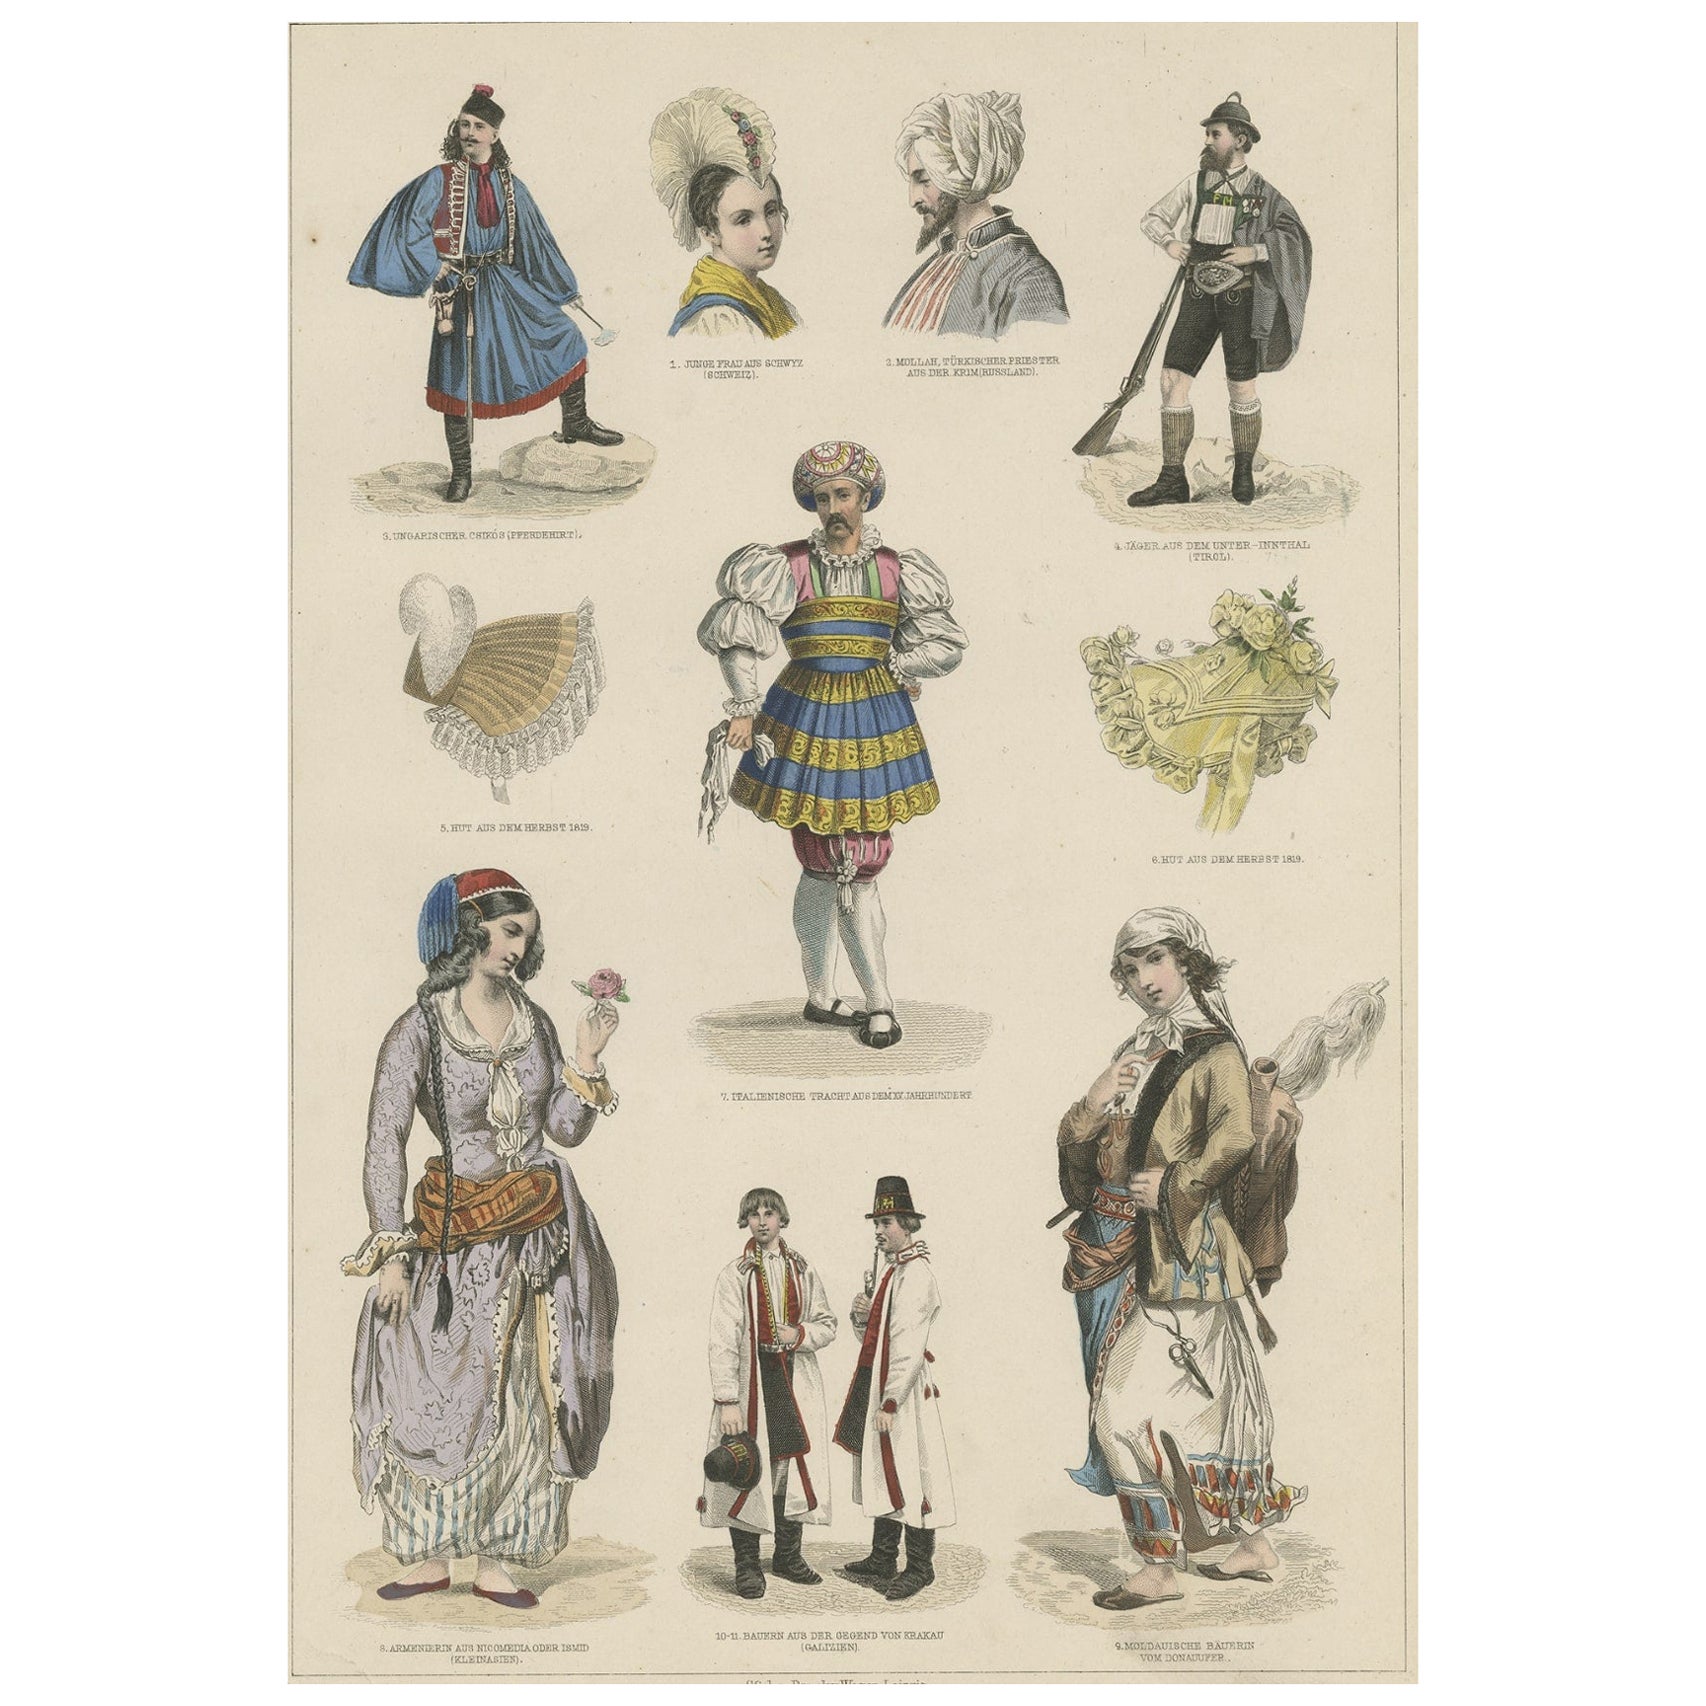 Antique Costume Print of Costumes of Switzerland, Tyrol, Asia and Others, C.1875